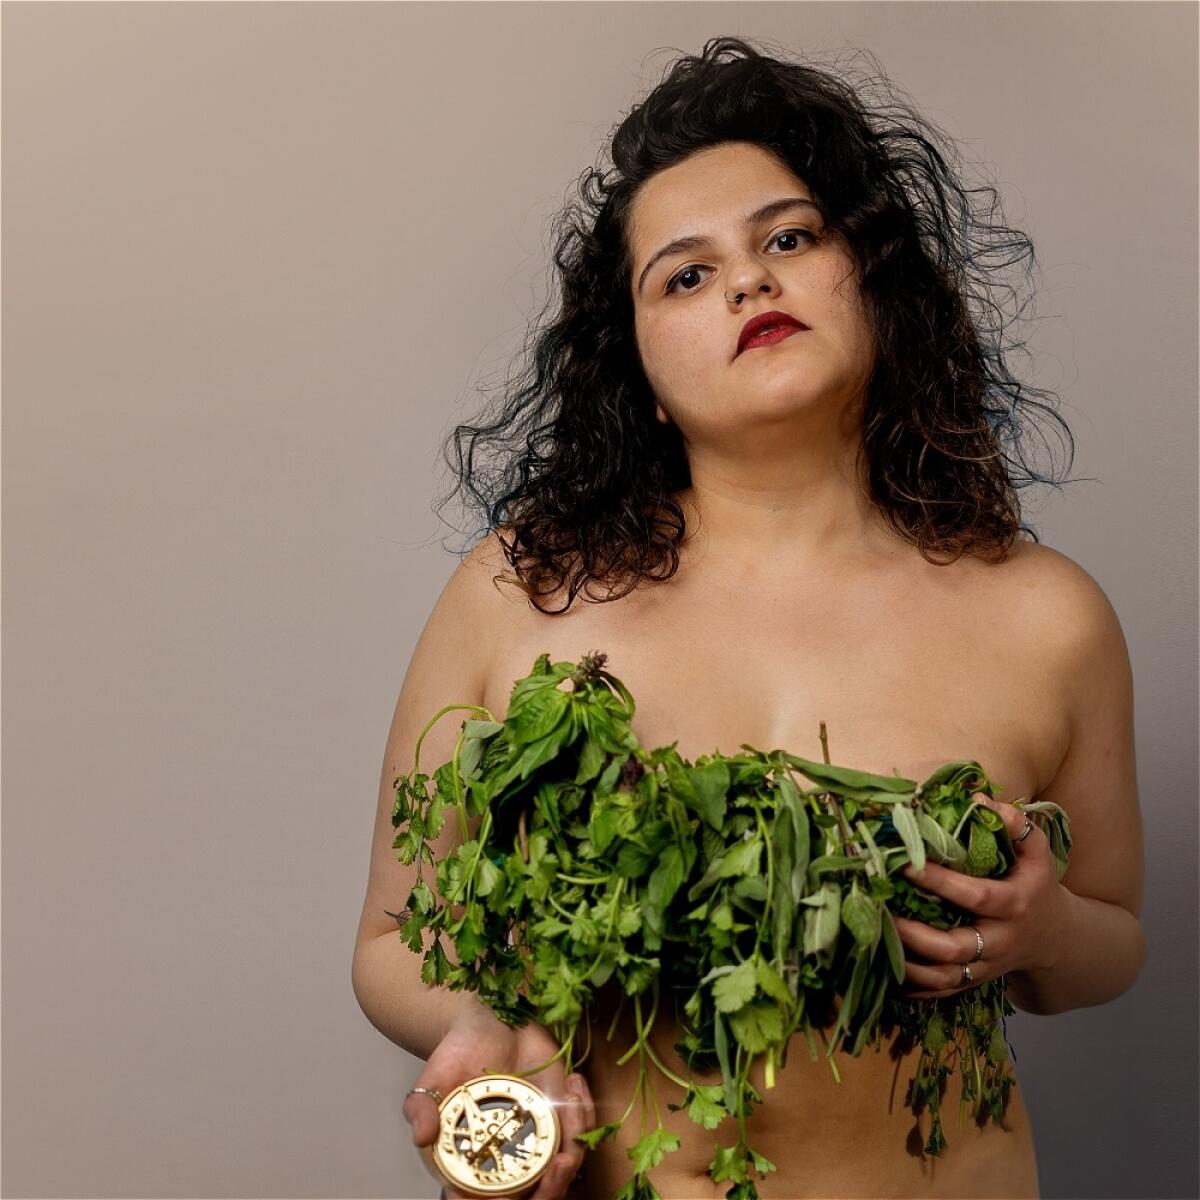 Indian-American comic Arzoo Malhotra holds a bunch of herbs.